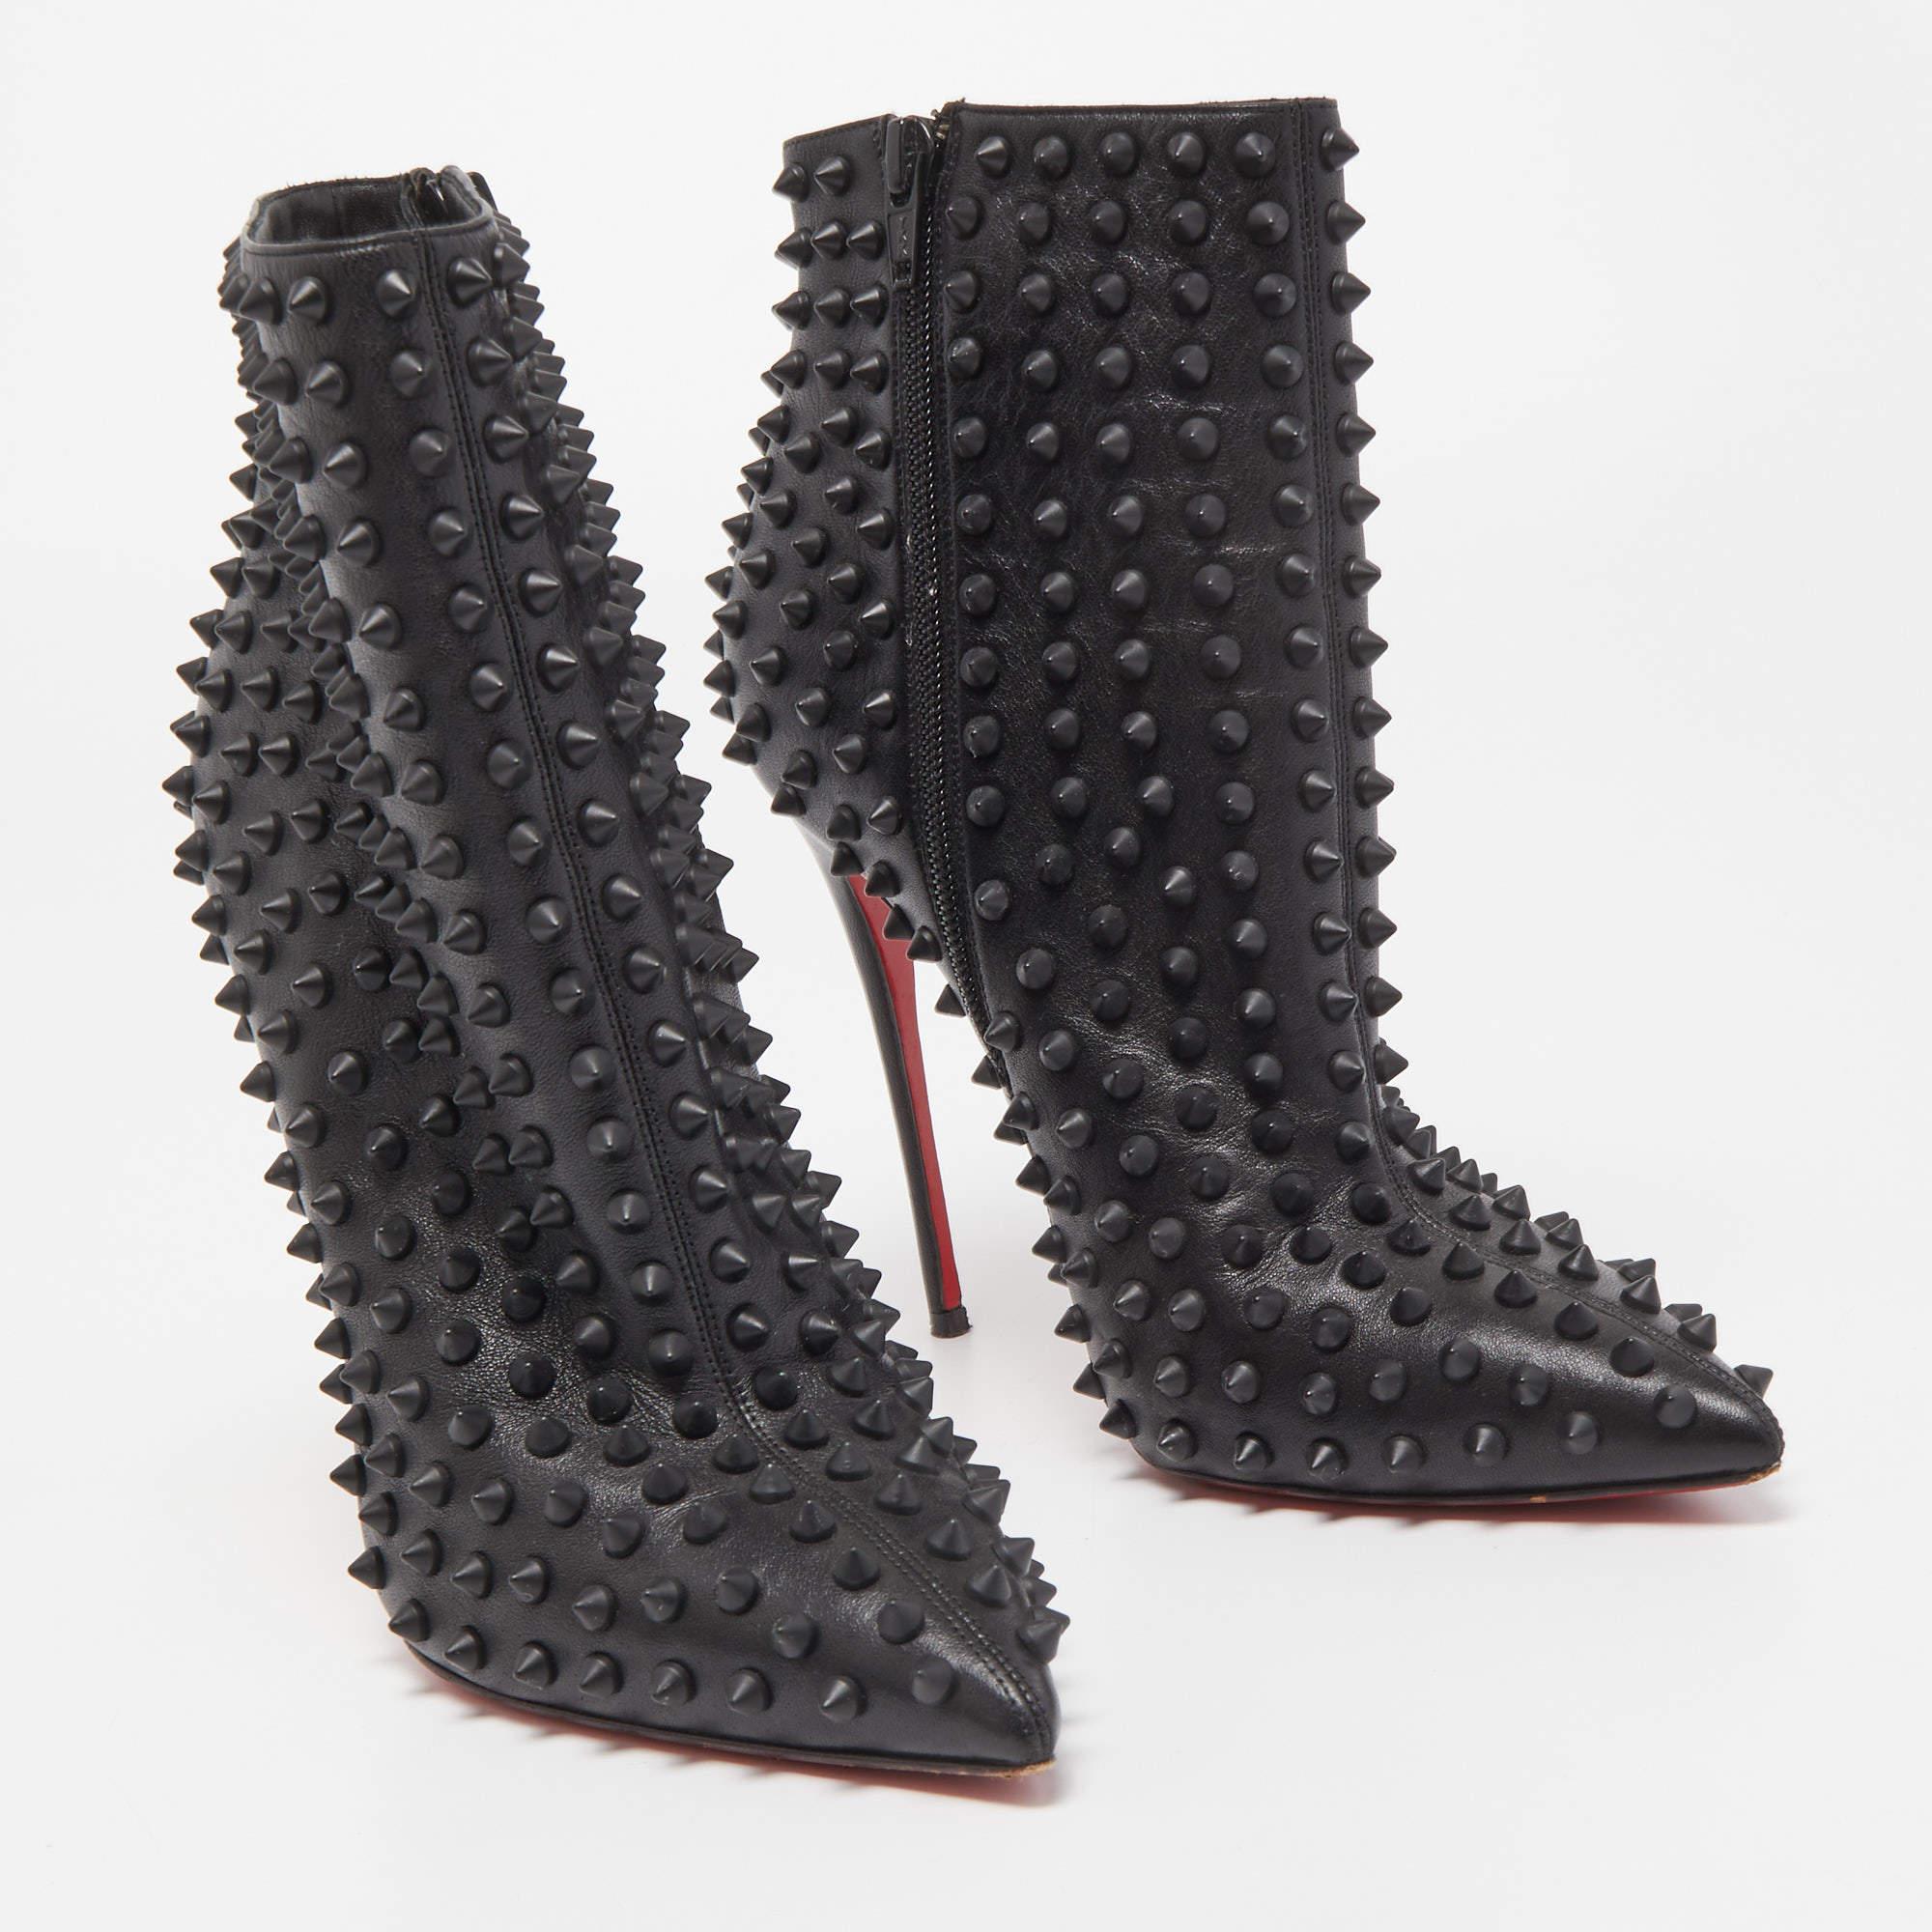 Christian Louboutin Black Leather Snakilta Spike Ankle Booties Size 38 In Good Condition In Dubai, Al Qouz 2